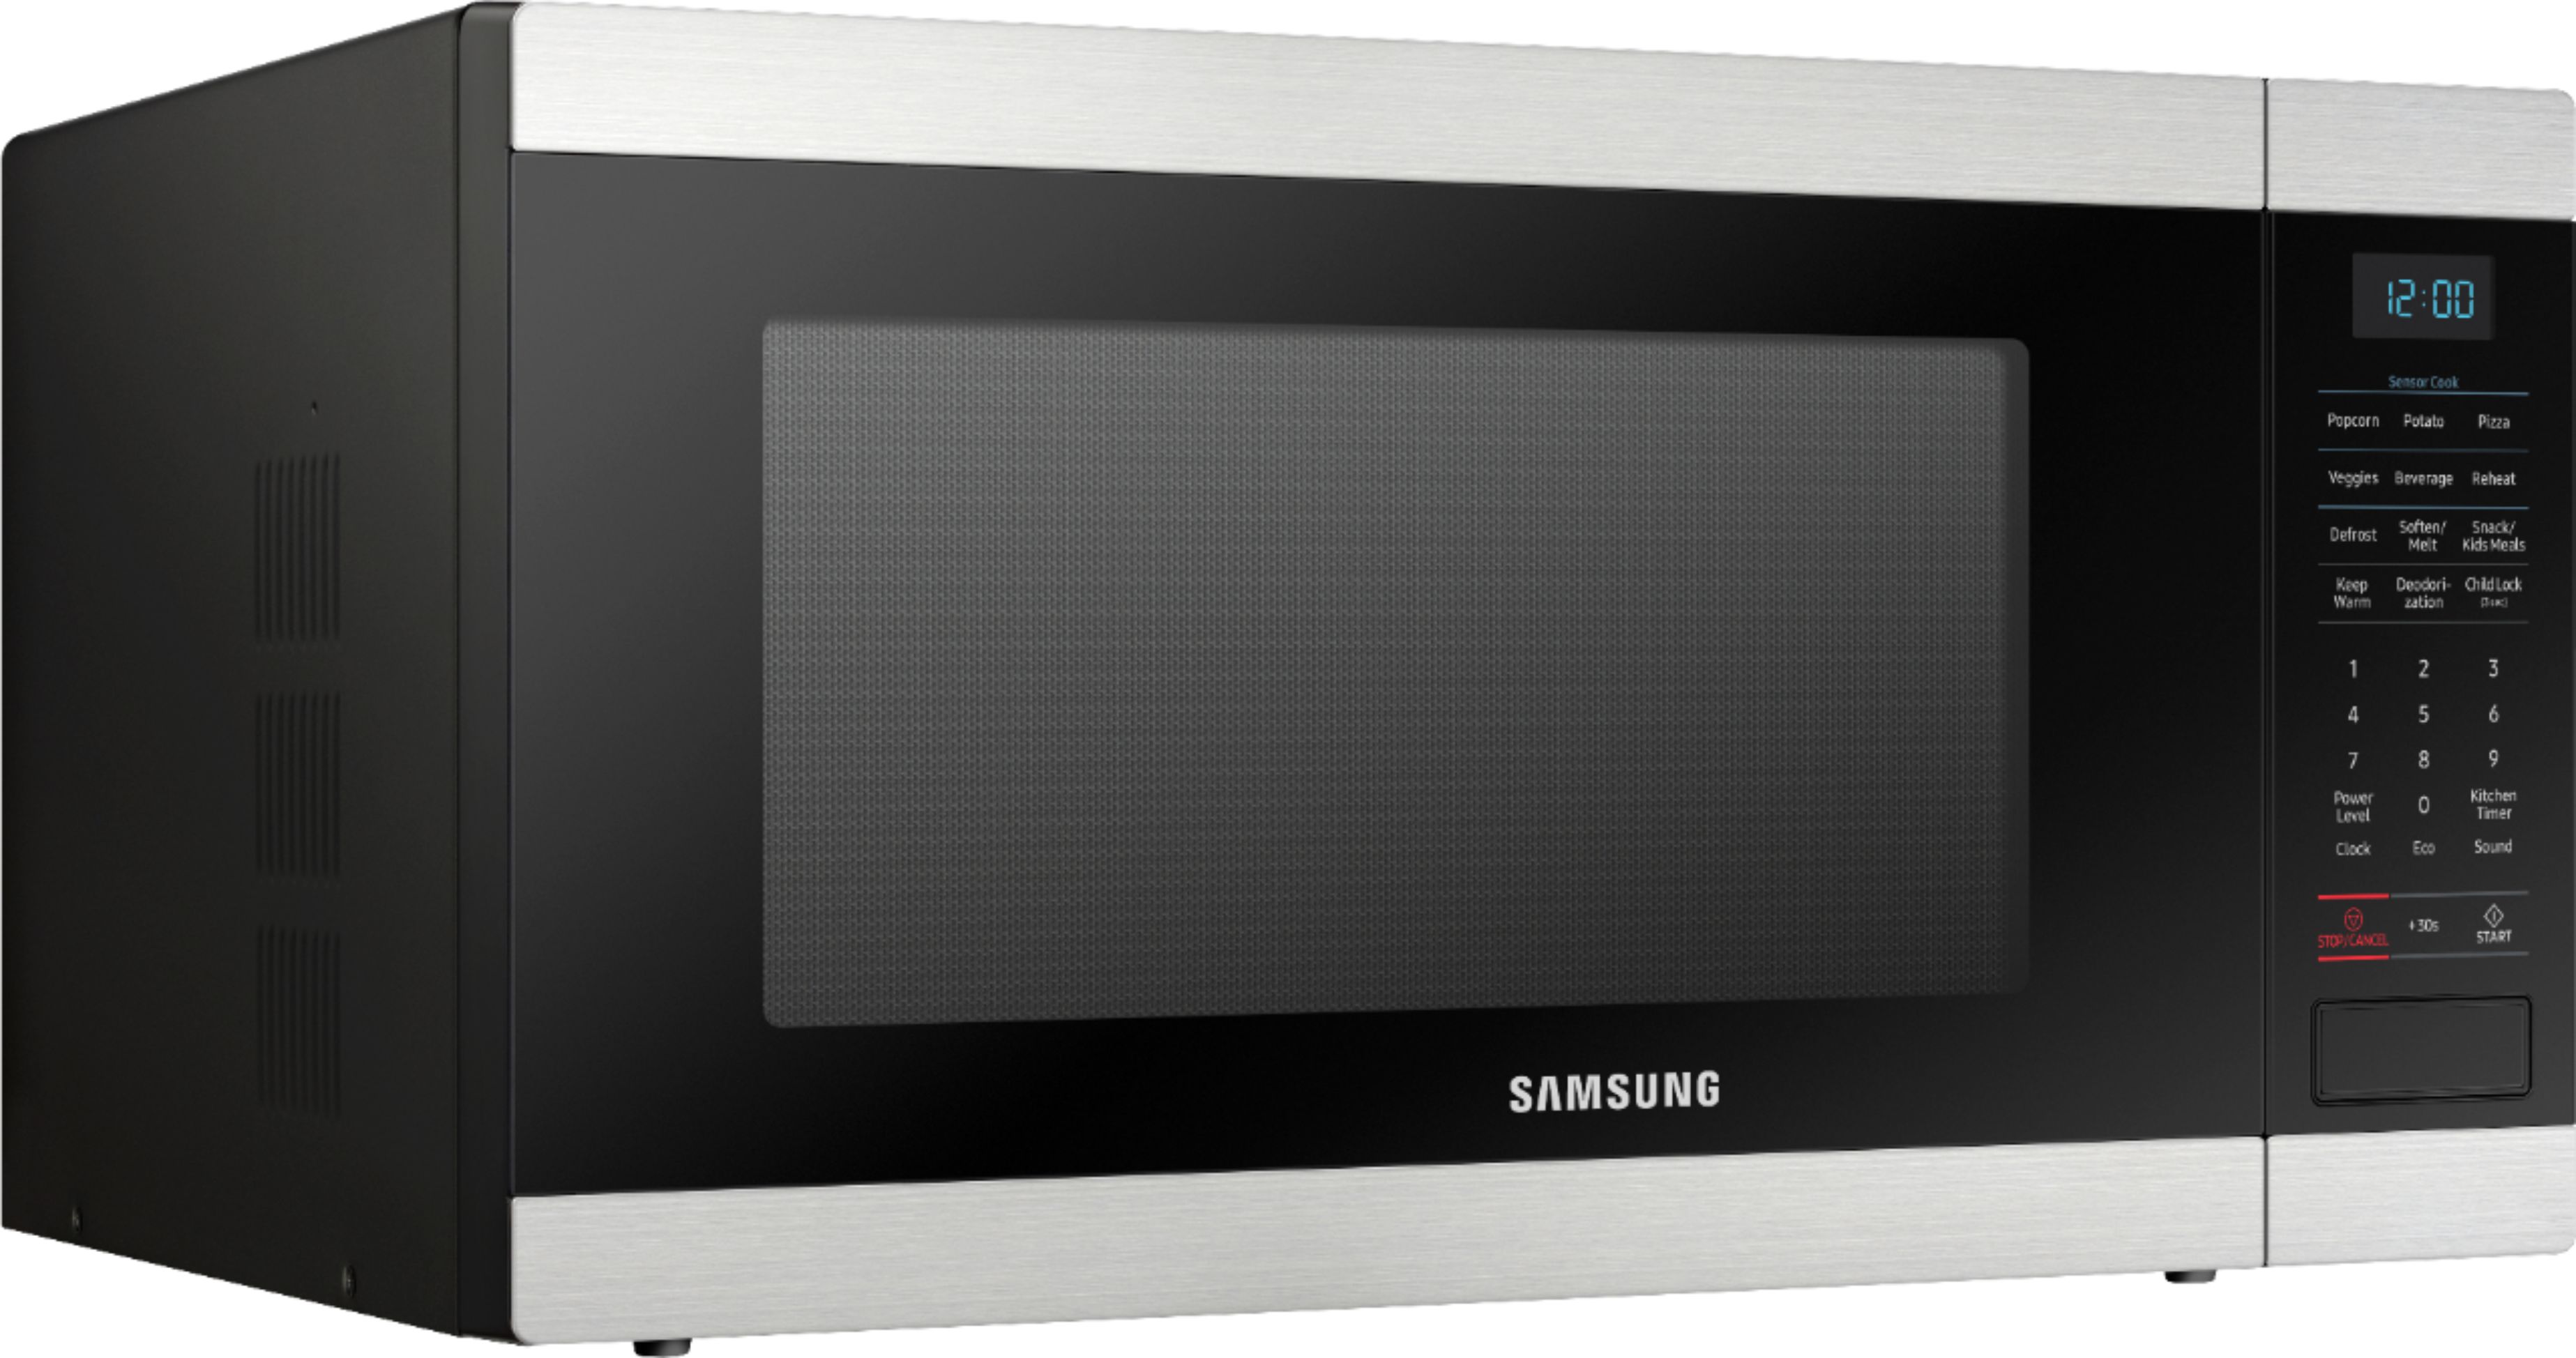 Angle View: Whirlpool - 1.1 Cu. Ft. Countertop Microwave with 900-Watt Cooking Power